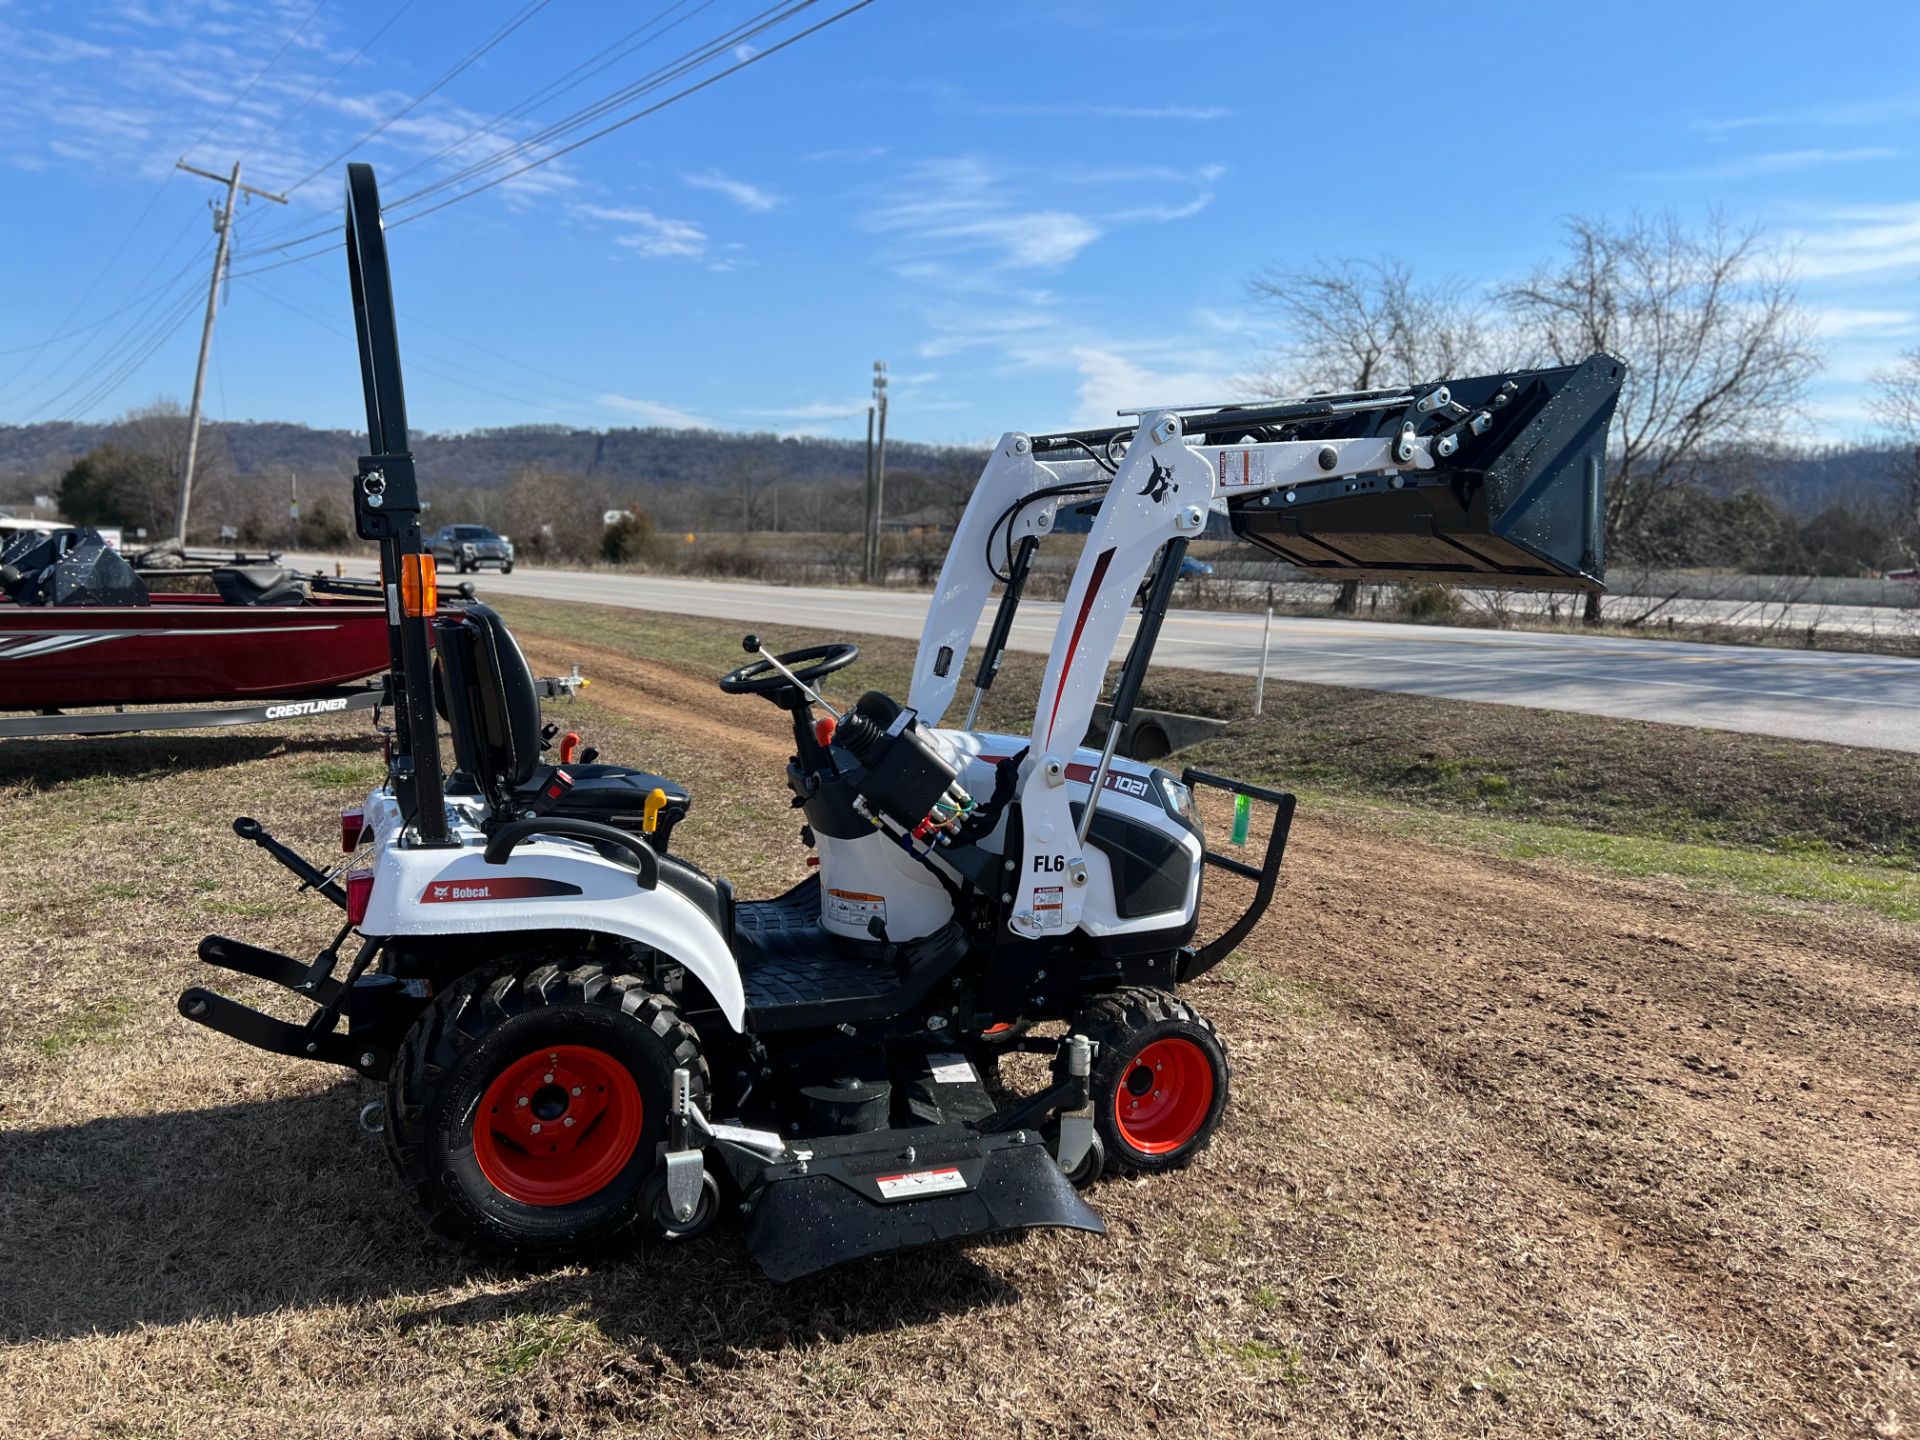 2023 Bobcat CT1025KA HD TRACTOR in Ooltewah, Tennessee - Photo 3